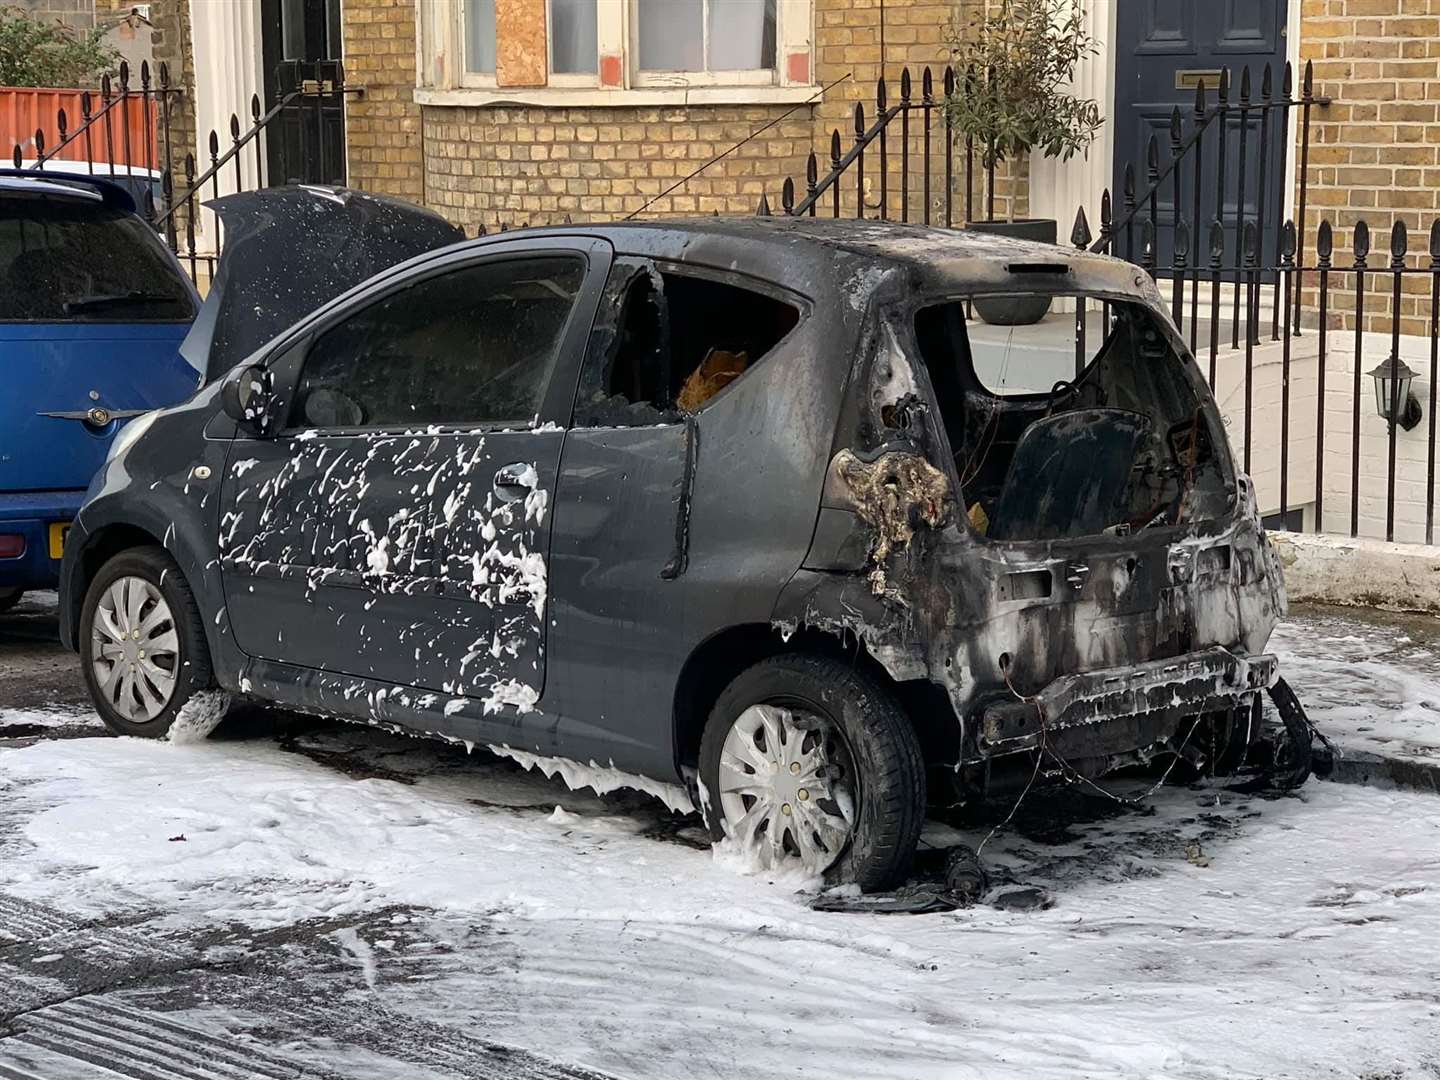 Cars were also set alight in the town three days ago